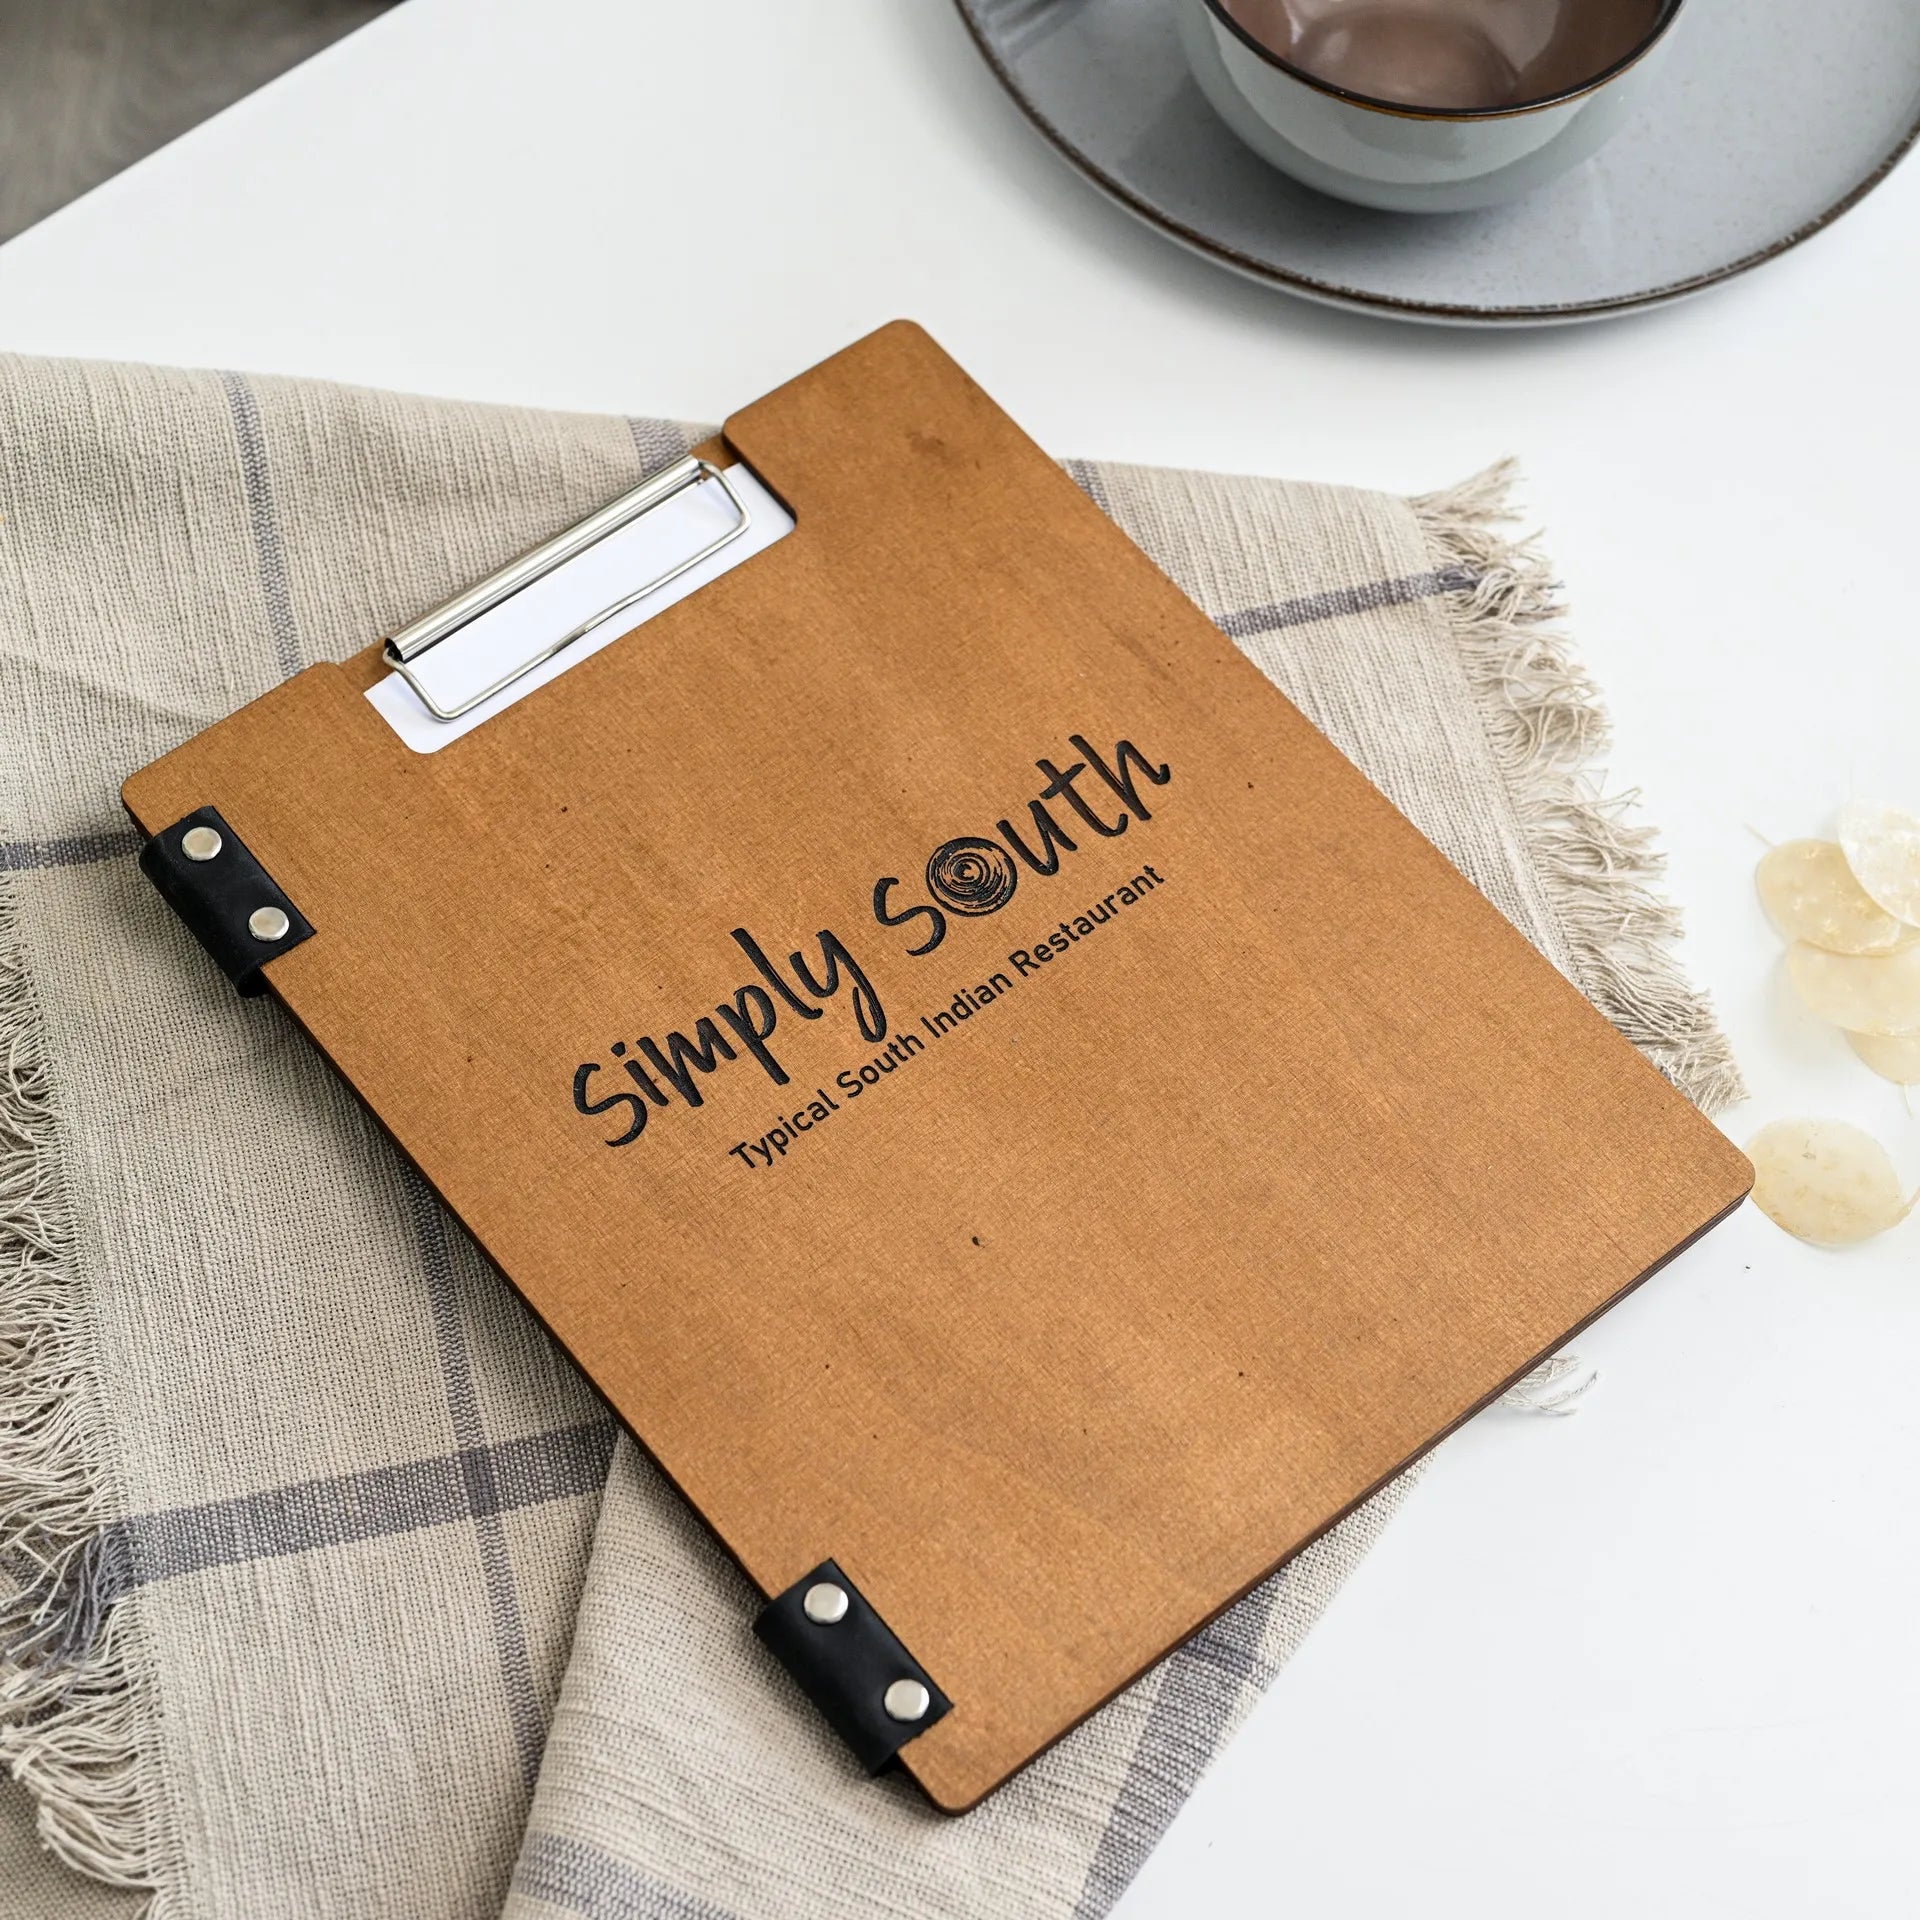 Clipboard with Binder: Keep menus organized and secure with this practical yet stylish option